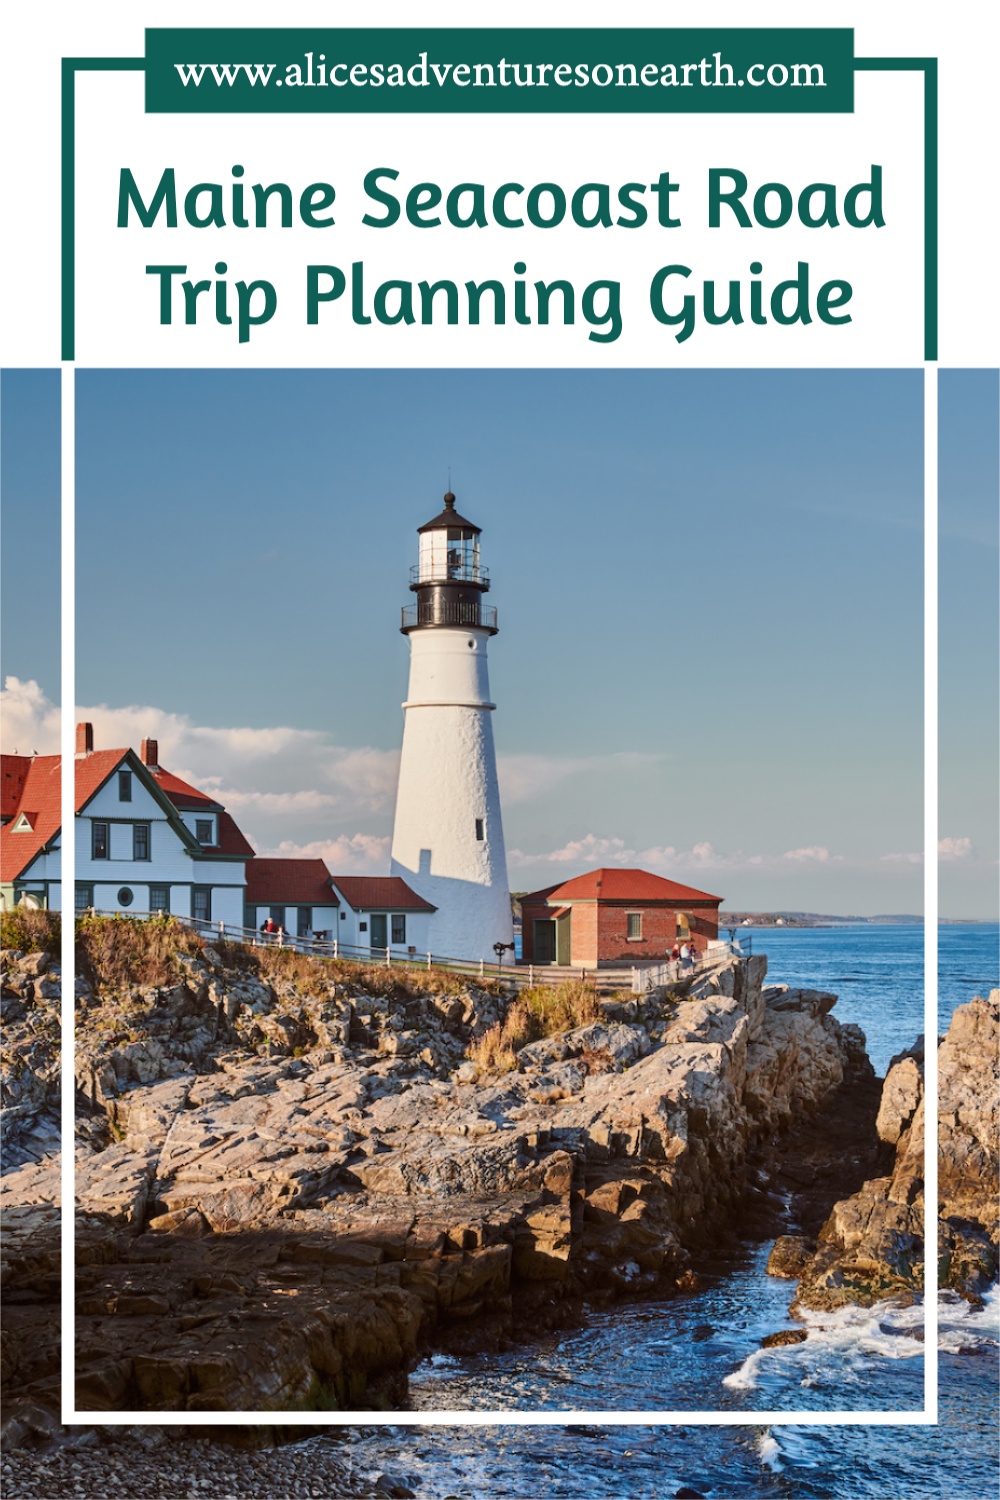 Road trip planning guide to Acadia, portland, york and the Maine seacoast. #maine #roadtrip 